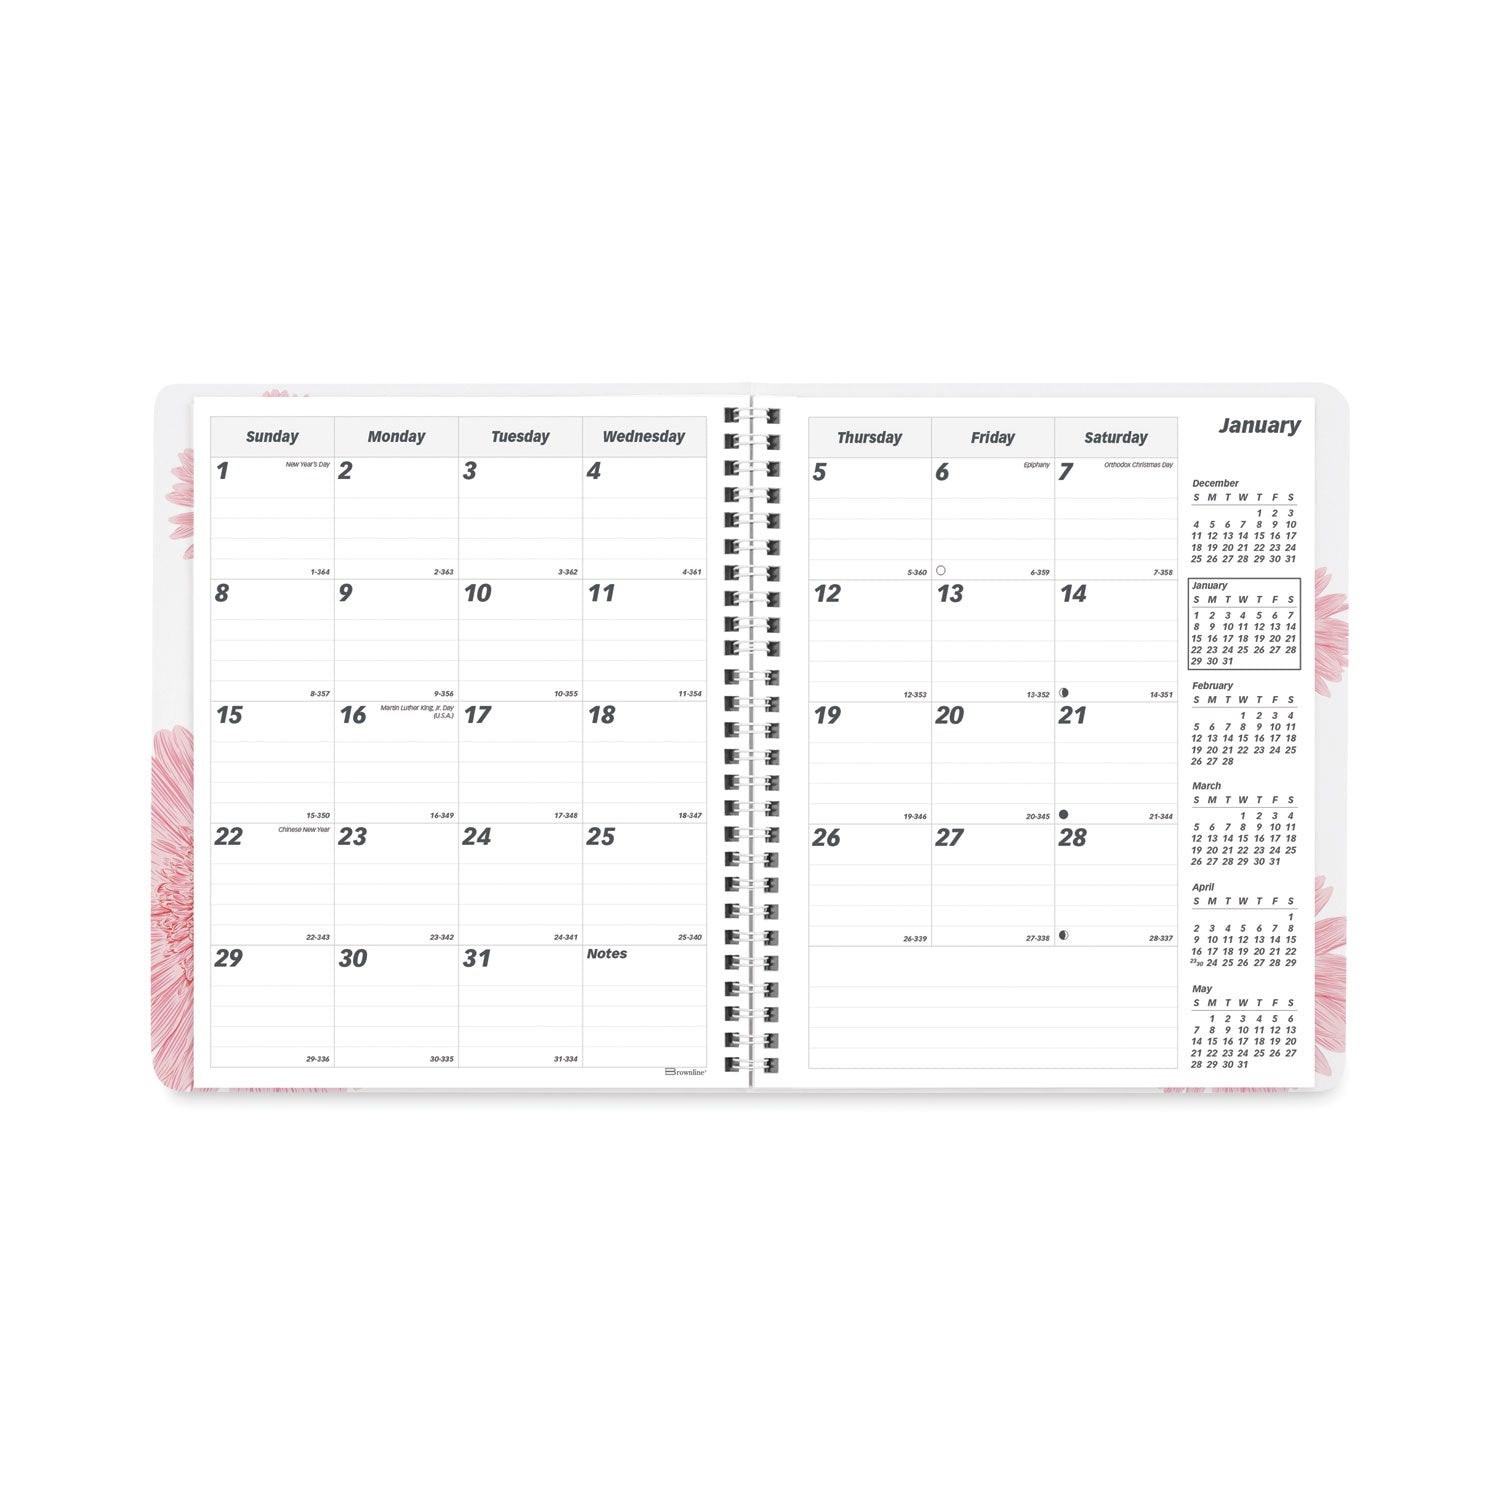 essential-collection-14-month-ruled-monthly-planner-888-x-713-daisy-black-pink-cover-14-month-dec-to-jan-2023-to-2025_redcb1200g05 - 2